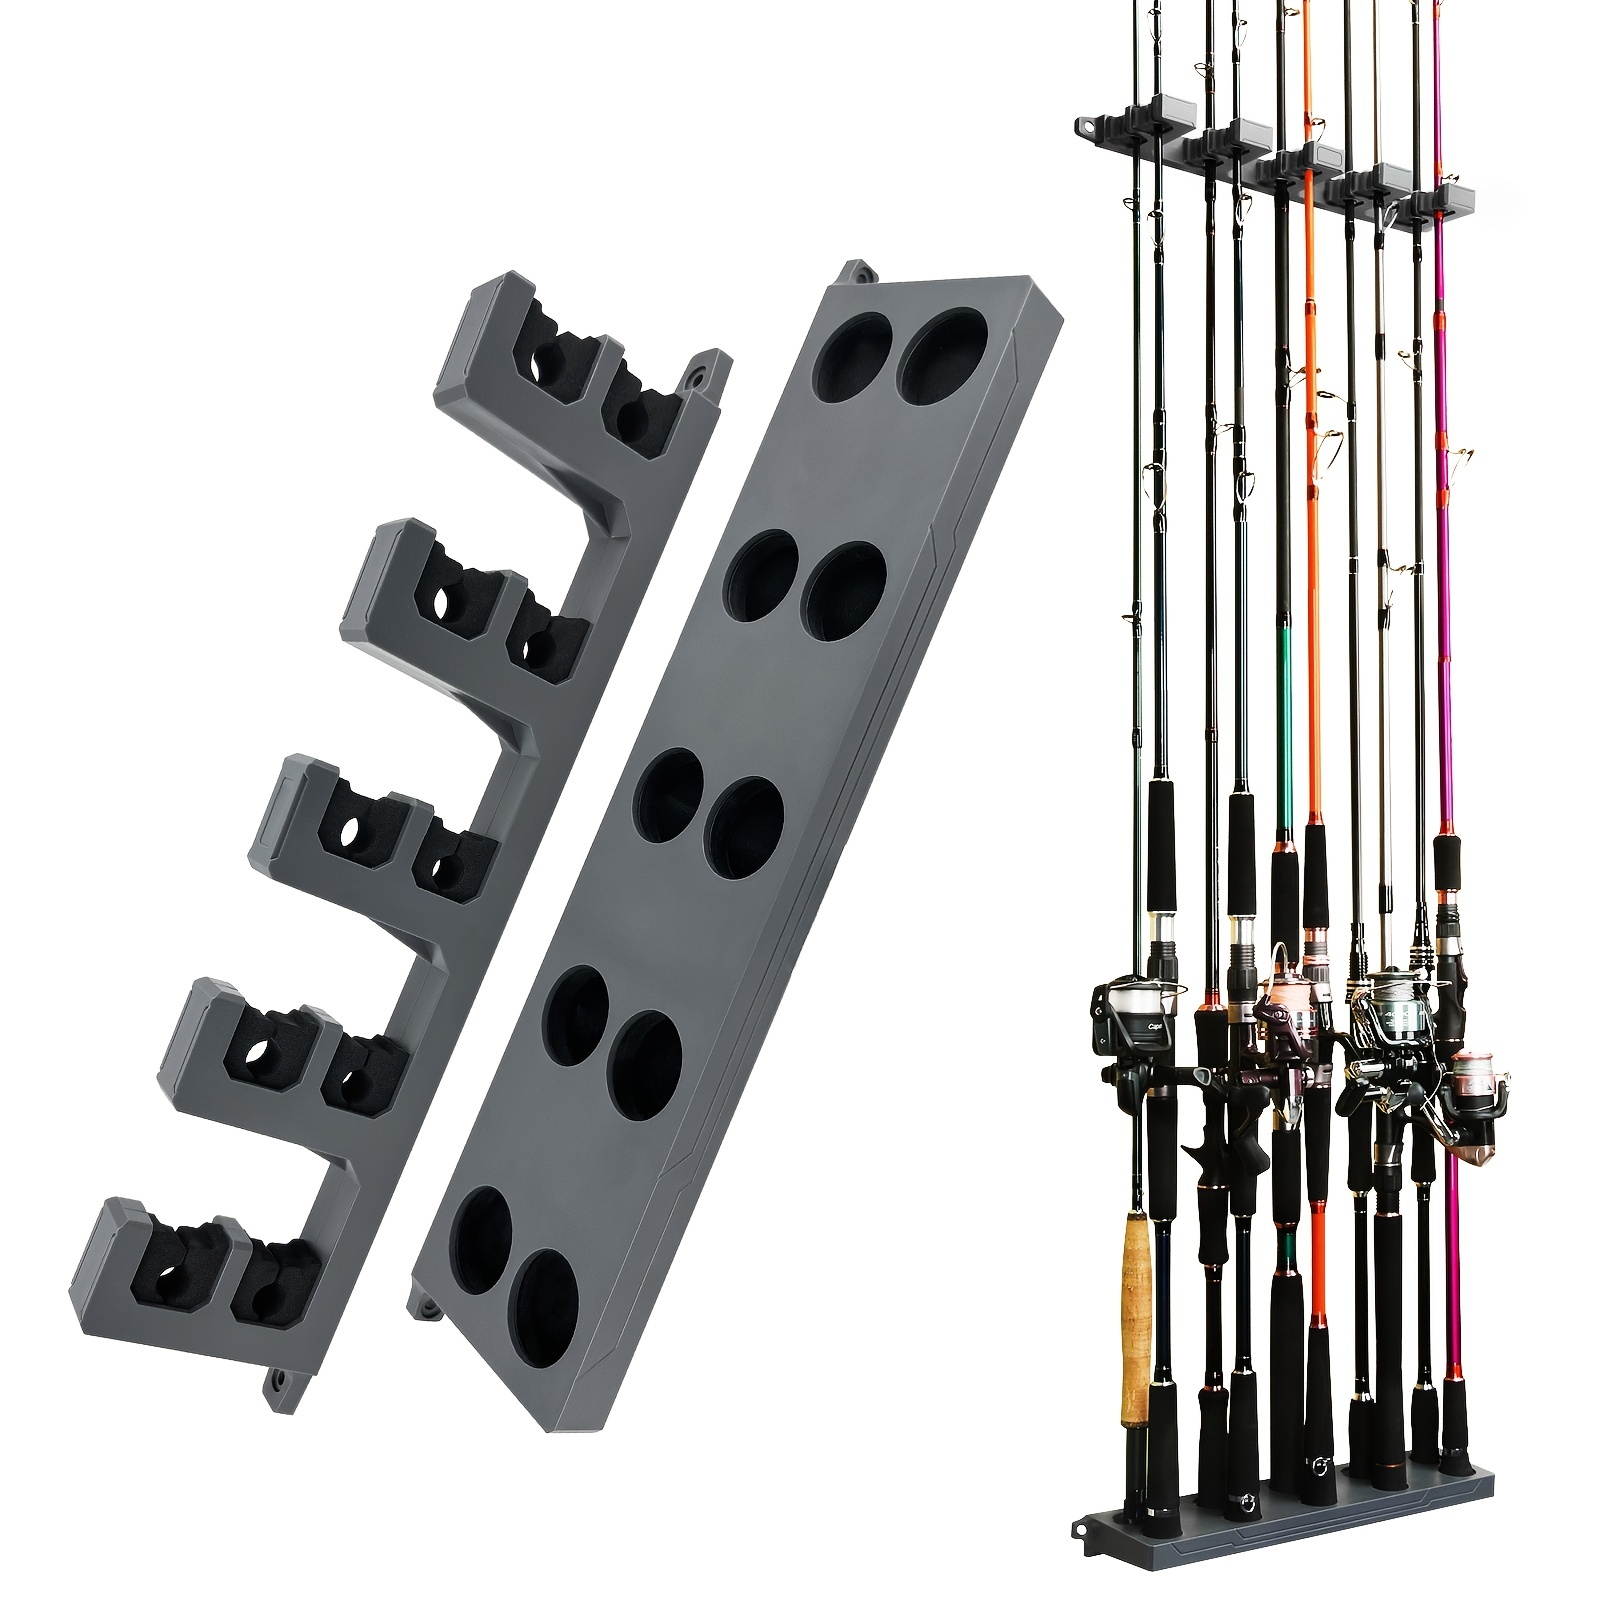 Organize Your Fishing Gear with this Wall-Mounted Rod Display Holder - Up  to 10 Rods!